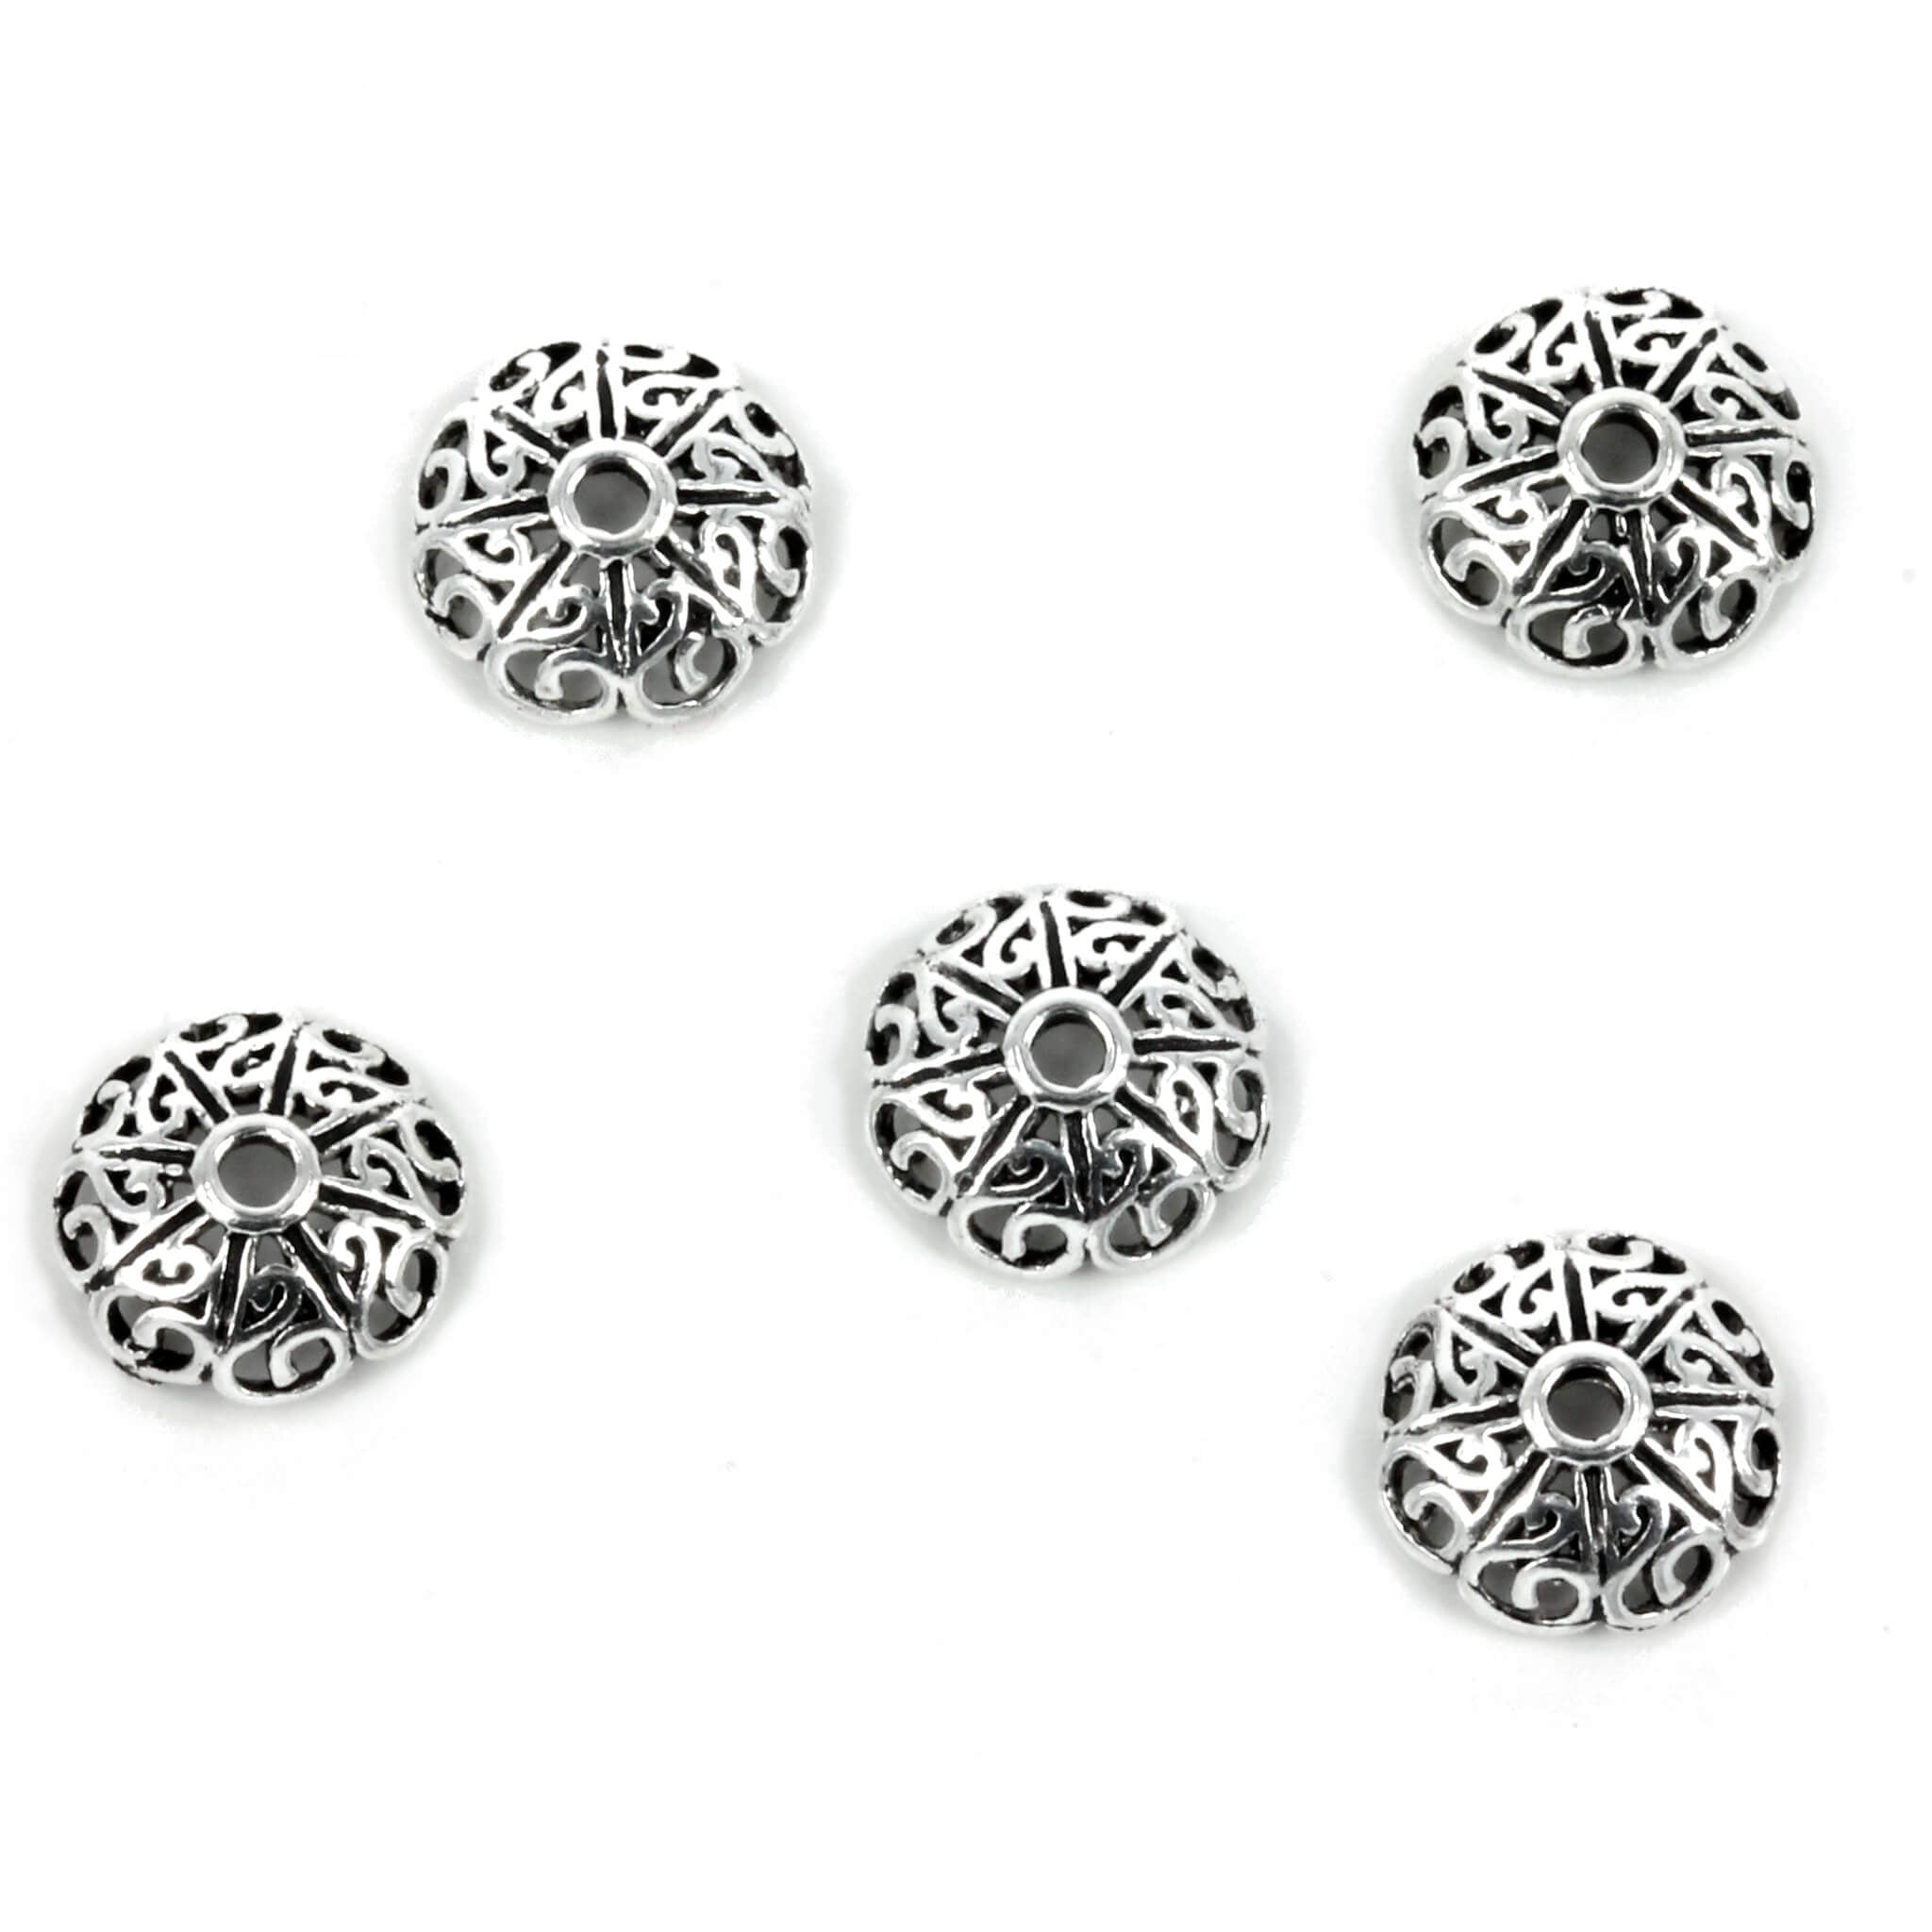 Open Rococo Patterned Bead Cap in Sterling Silver 7mm